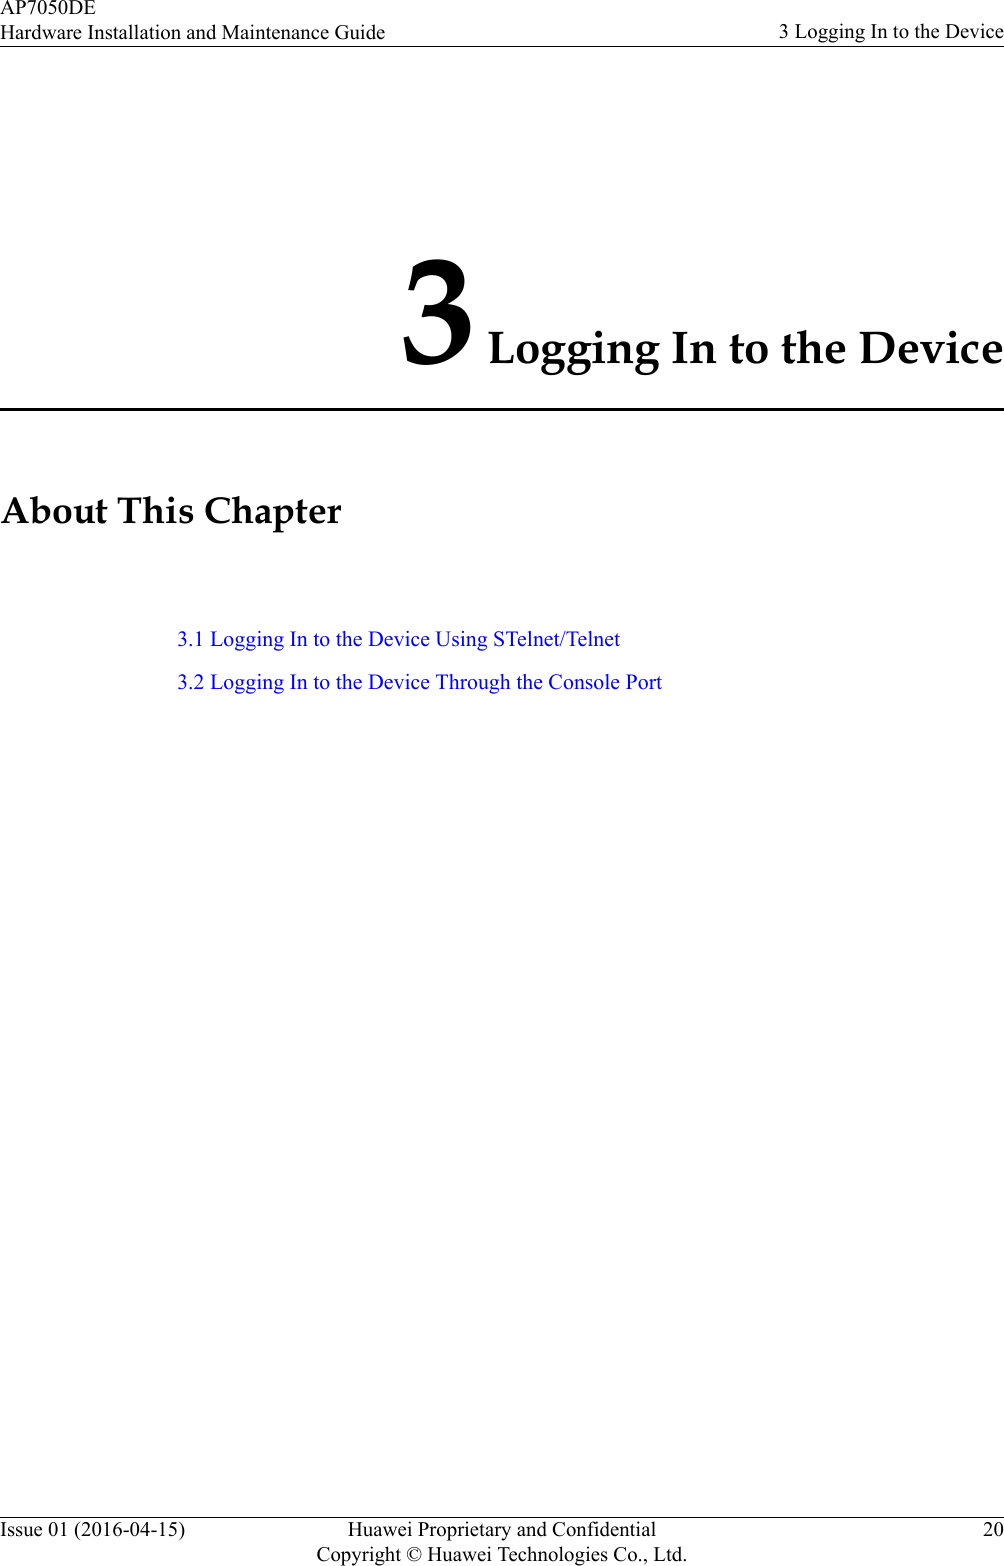 3 Logging In to the DeviceAbout This Chapter3.1 Logging In to the Device Using STelnet/Telnet3.2 Logging In to the Device Through the Console PortAP7050DEHardware Installation and Maintenance Guide 3 Logging In to the DeviceIssue 01 (2016-04-15) Huawei Proprietary and ConfidentialCopyright © Huawei Technologies Co., Ltd.20